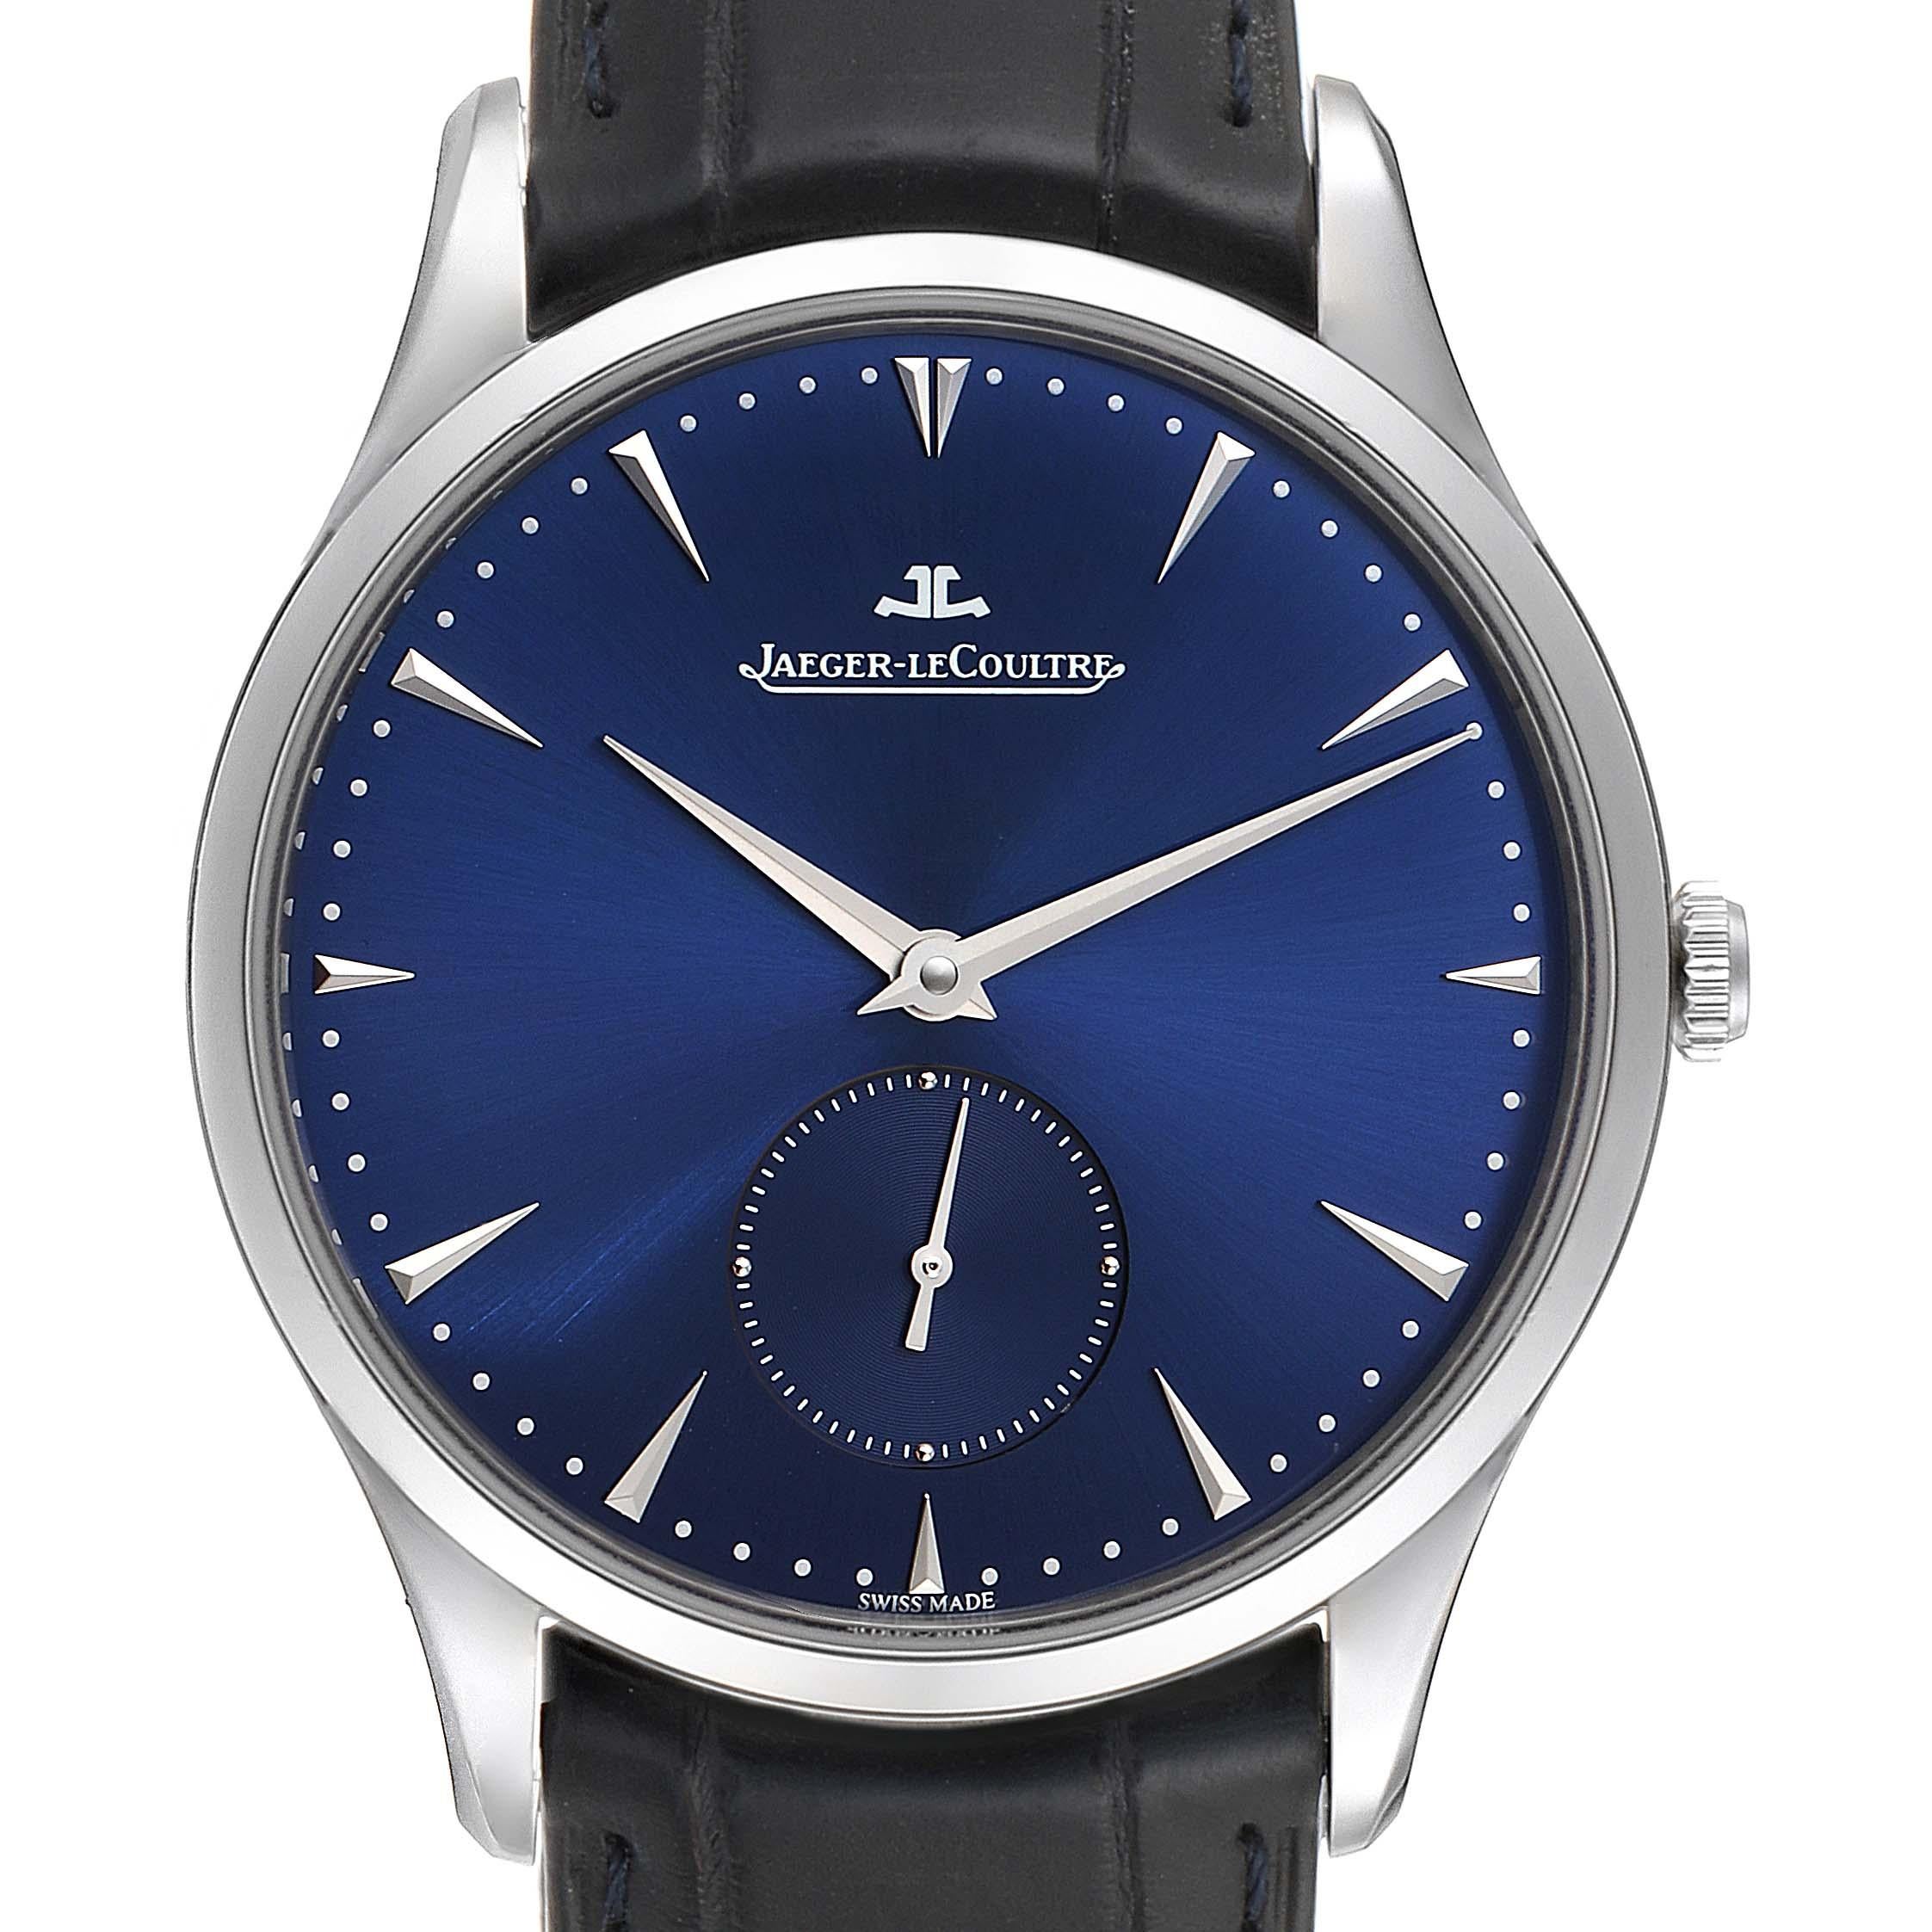 aeger Lecoultre Master Grande Ultra Thin Mens Watch 174.8.90.s Q1358480. Automatic self-winding movement. Stainless steel ultra-thin round case 40.0 mm in diameter. Curved lugs. Exhibition caseback secured by four screws. Stainless steel smooth